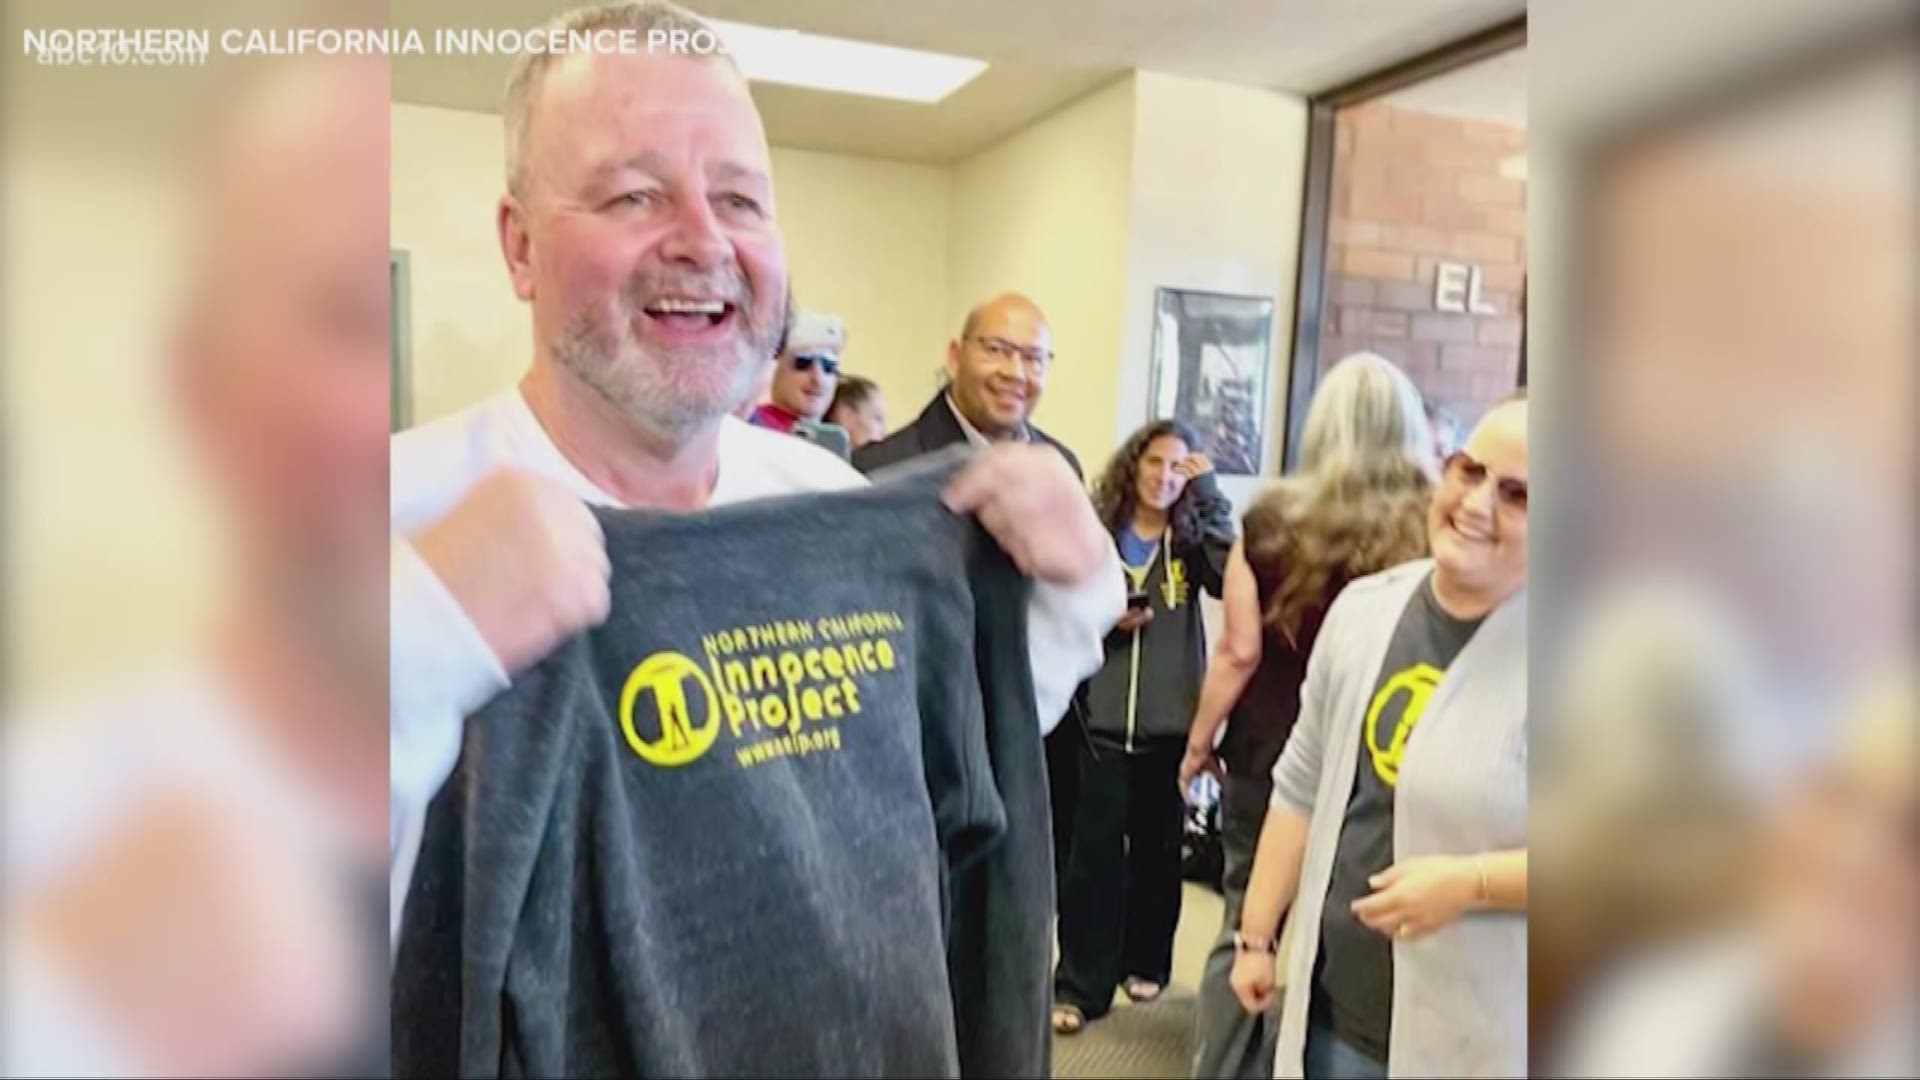 Ricky Davis was released from prison after serving a life sentence for a murder he didn't commit. Davis will now transition into living in El Dorado County.